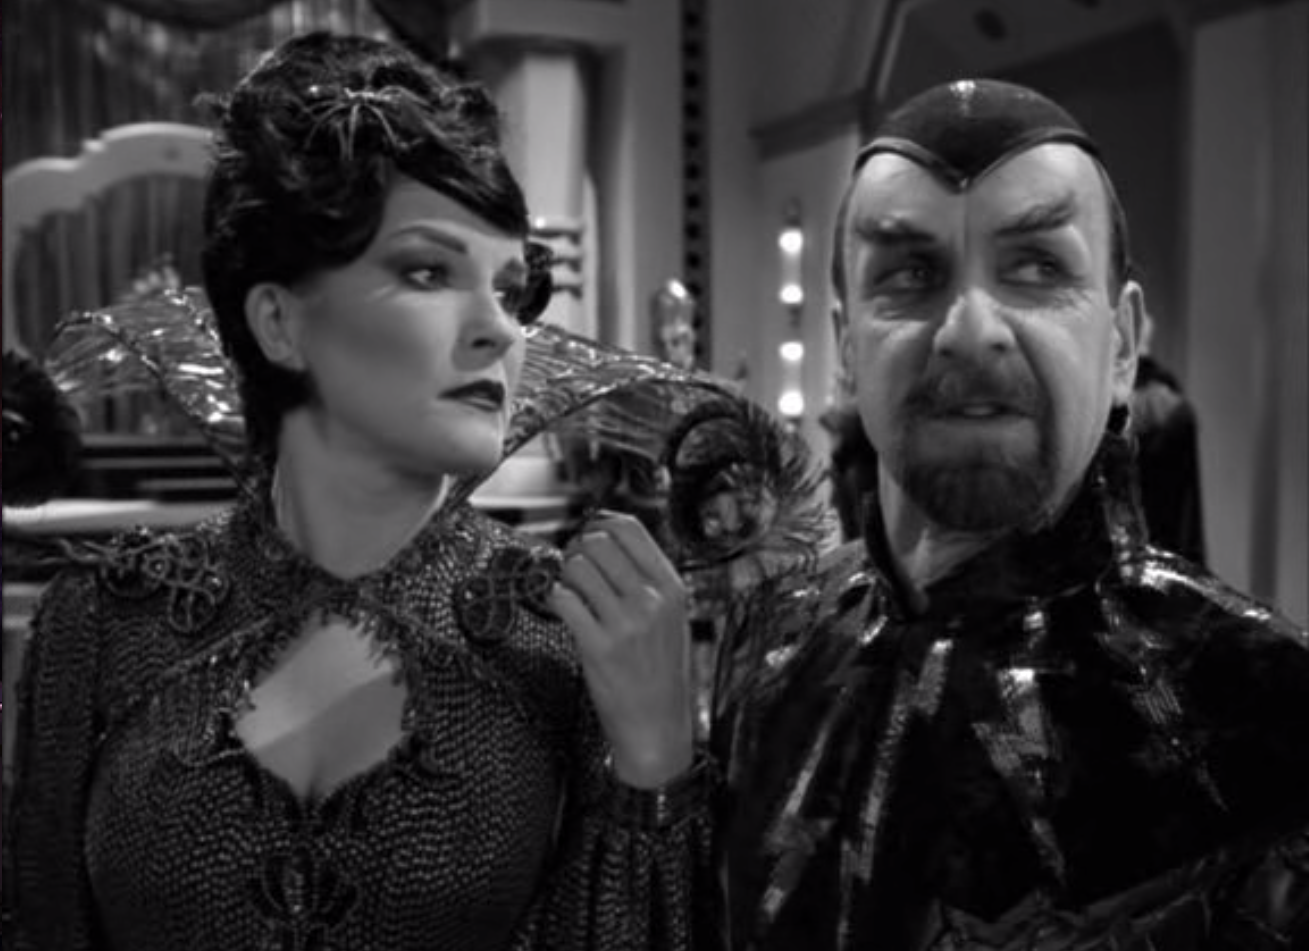 Janeway as Arachnia with Dr. Chaotica